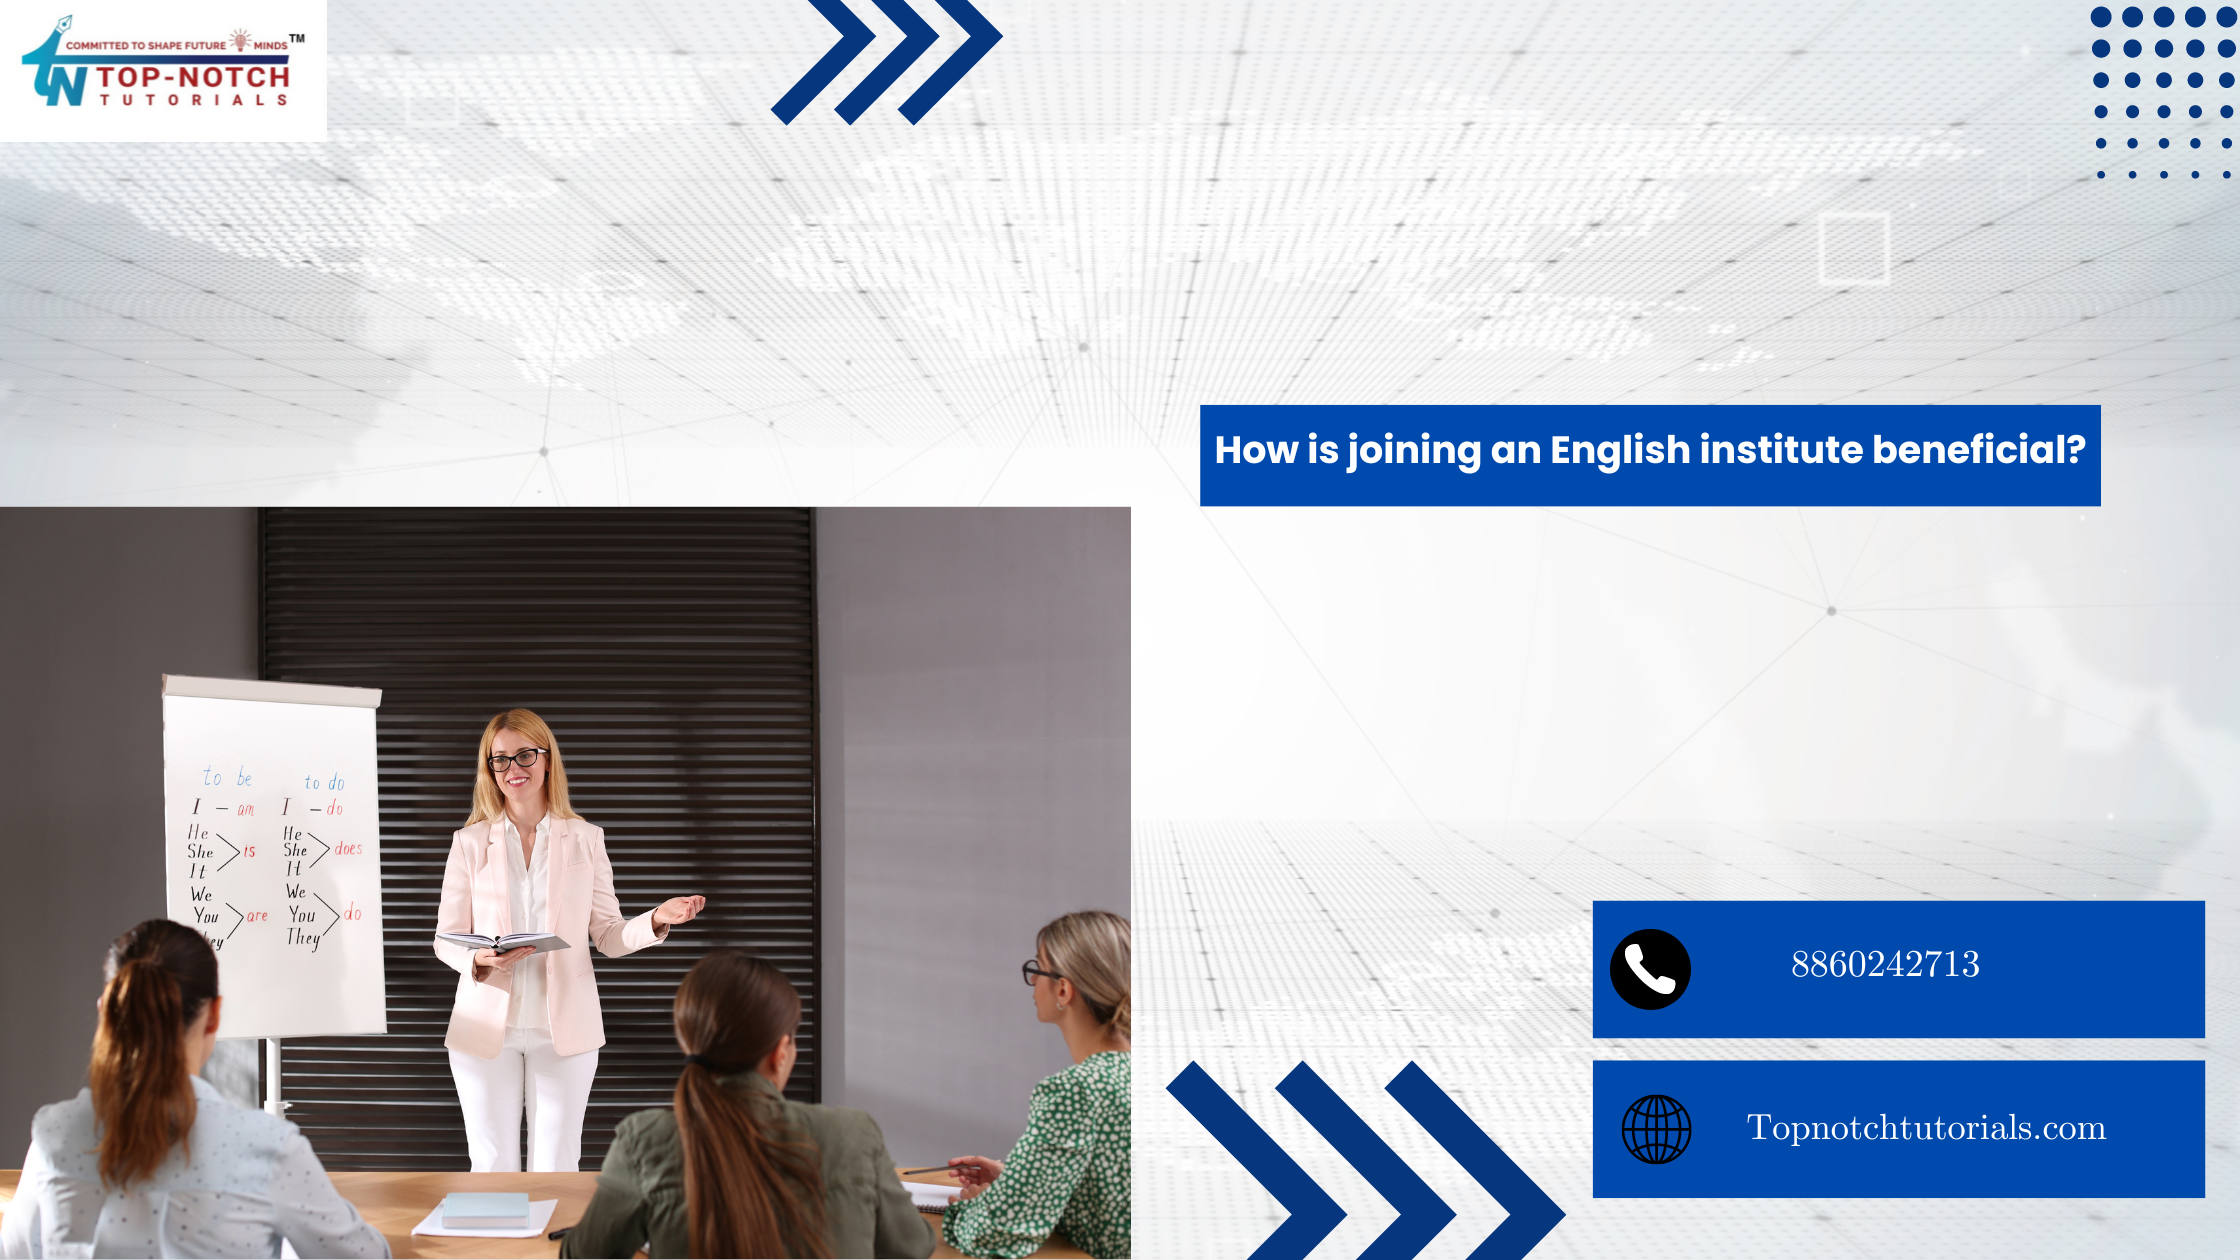 How is joining an English institute beneficial?